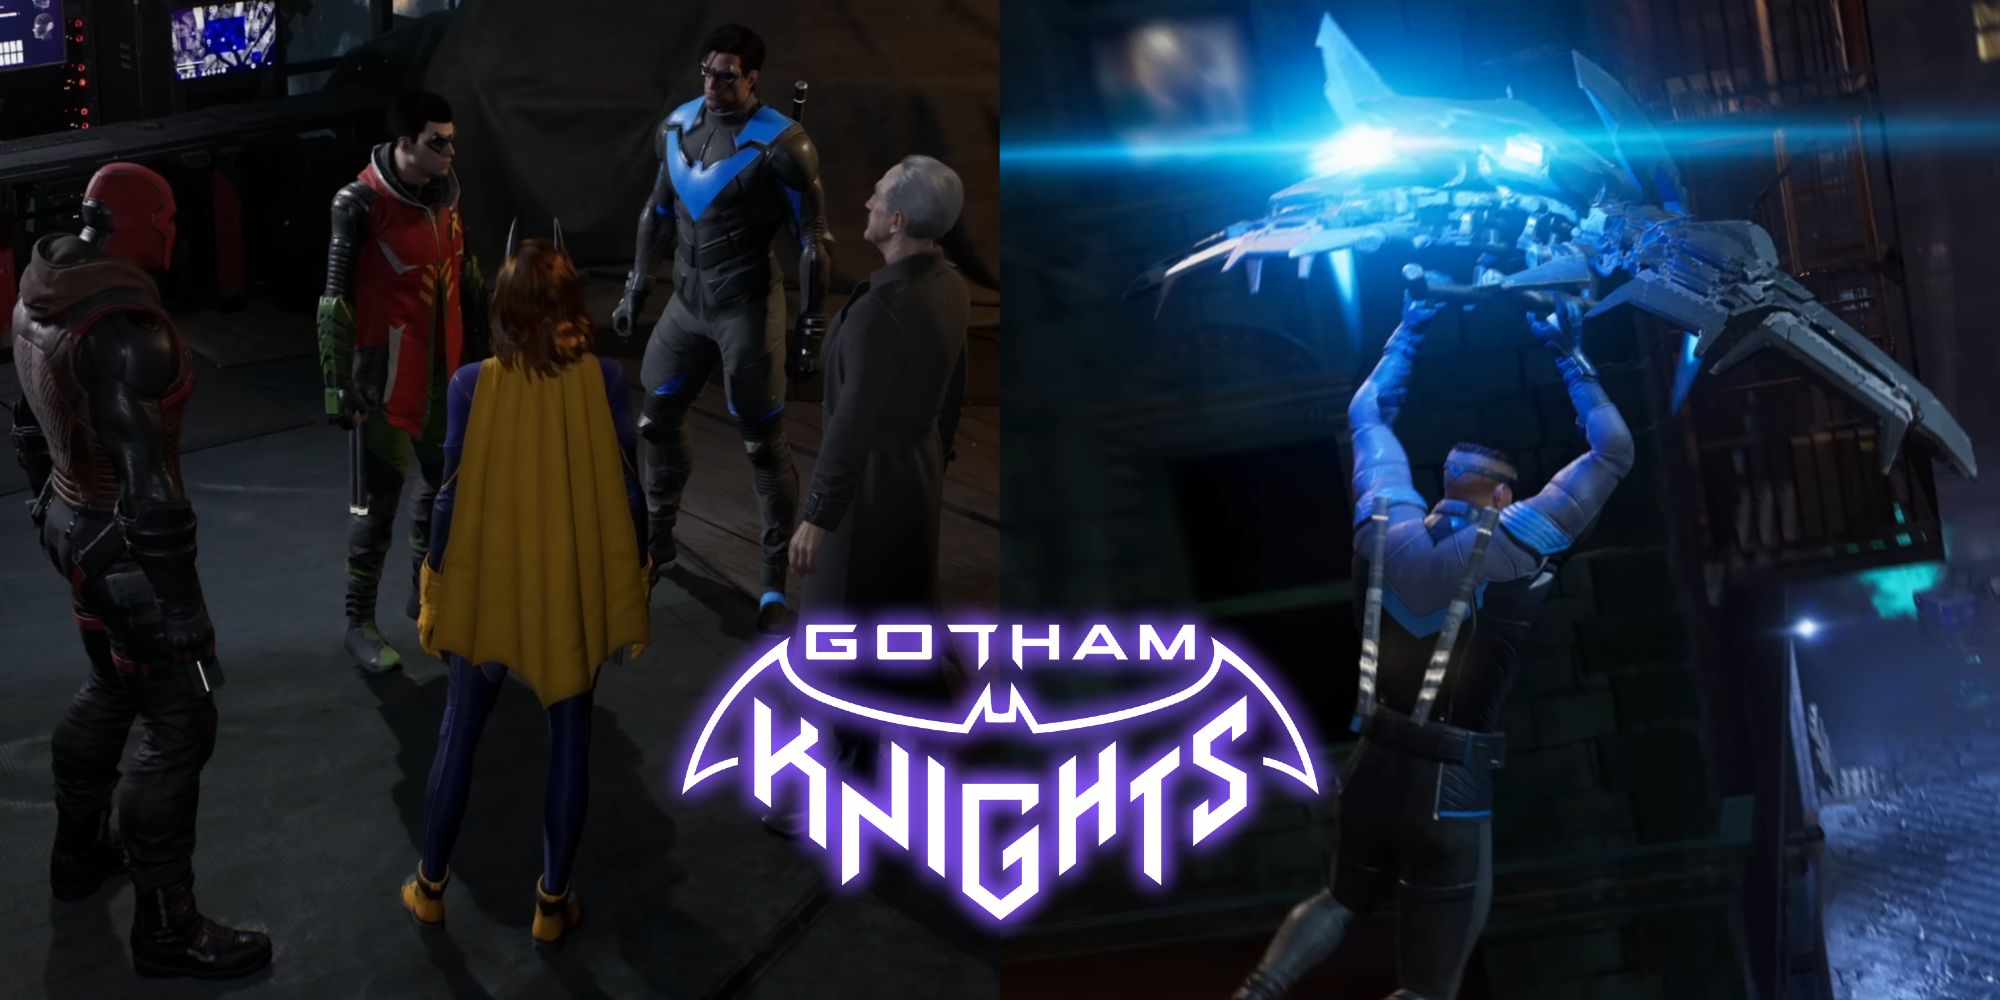 Gotham Knights Will Spread Their Wings in October 